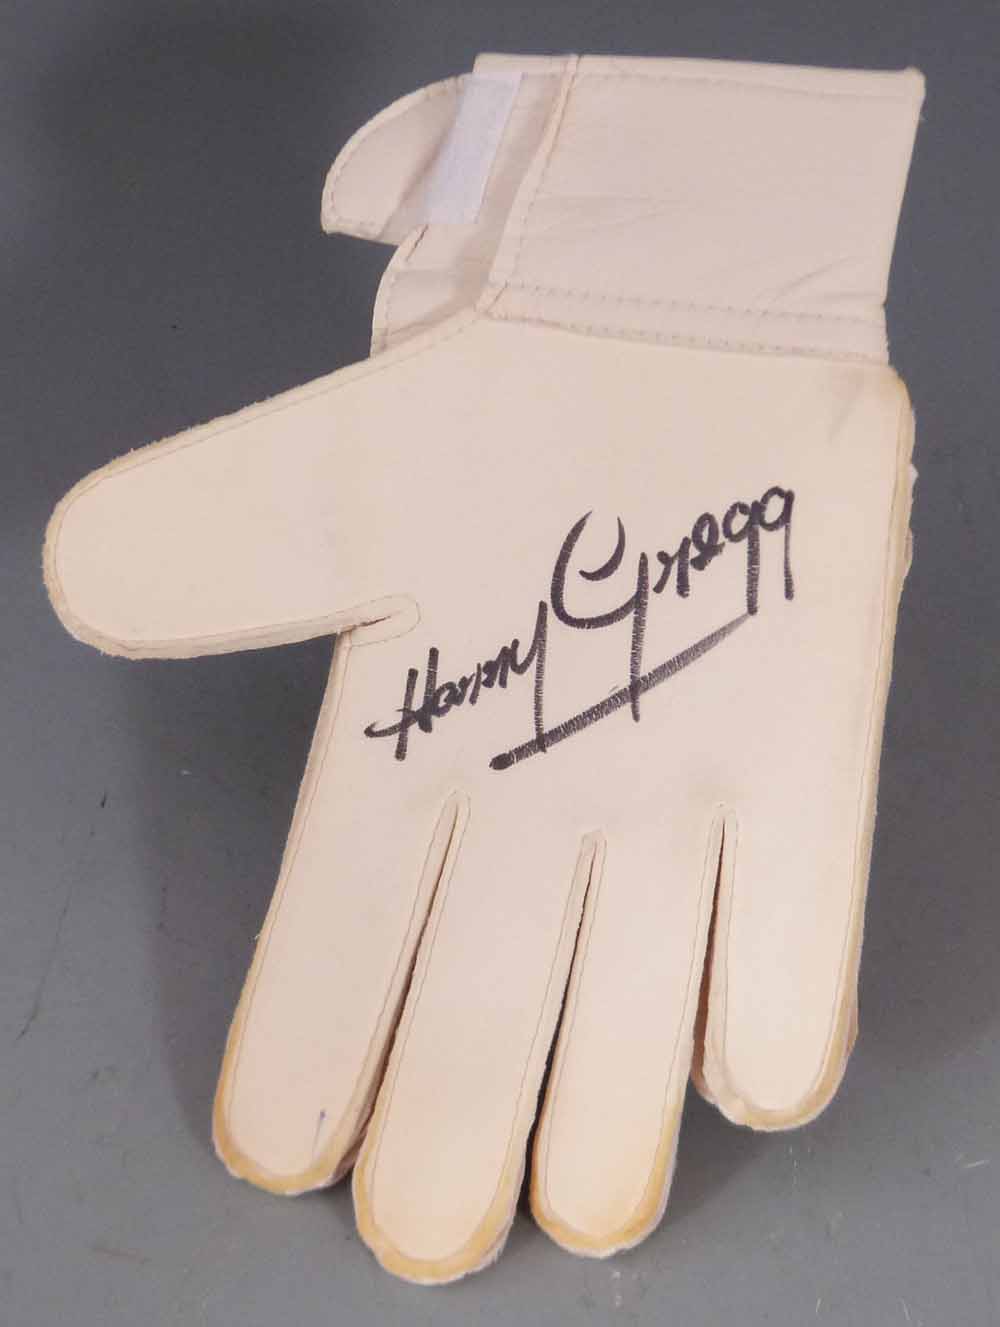 Umbro Goal Keeper`s glove signed by Harry Gregg (Manchester United) together with Sporting Legends